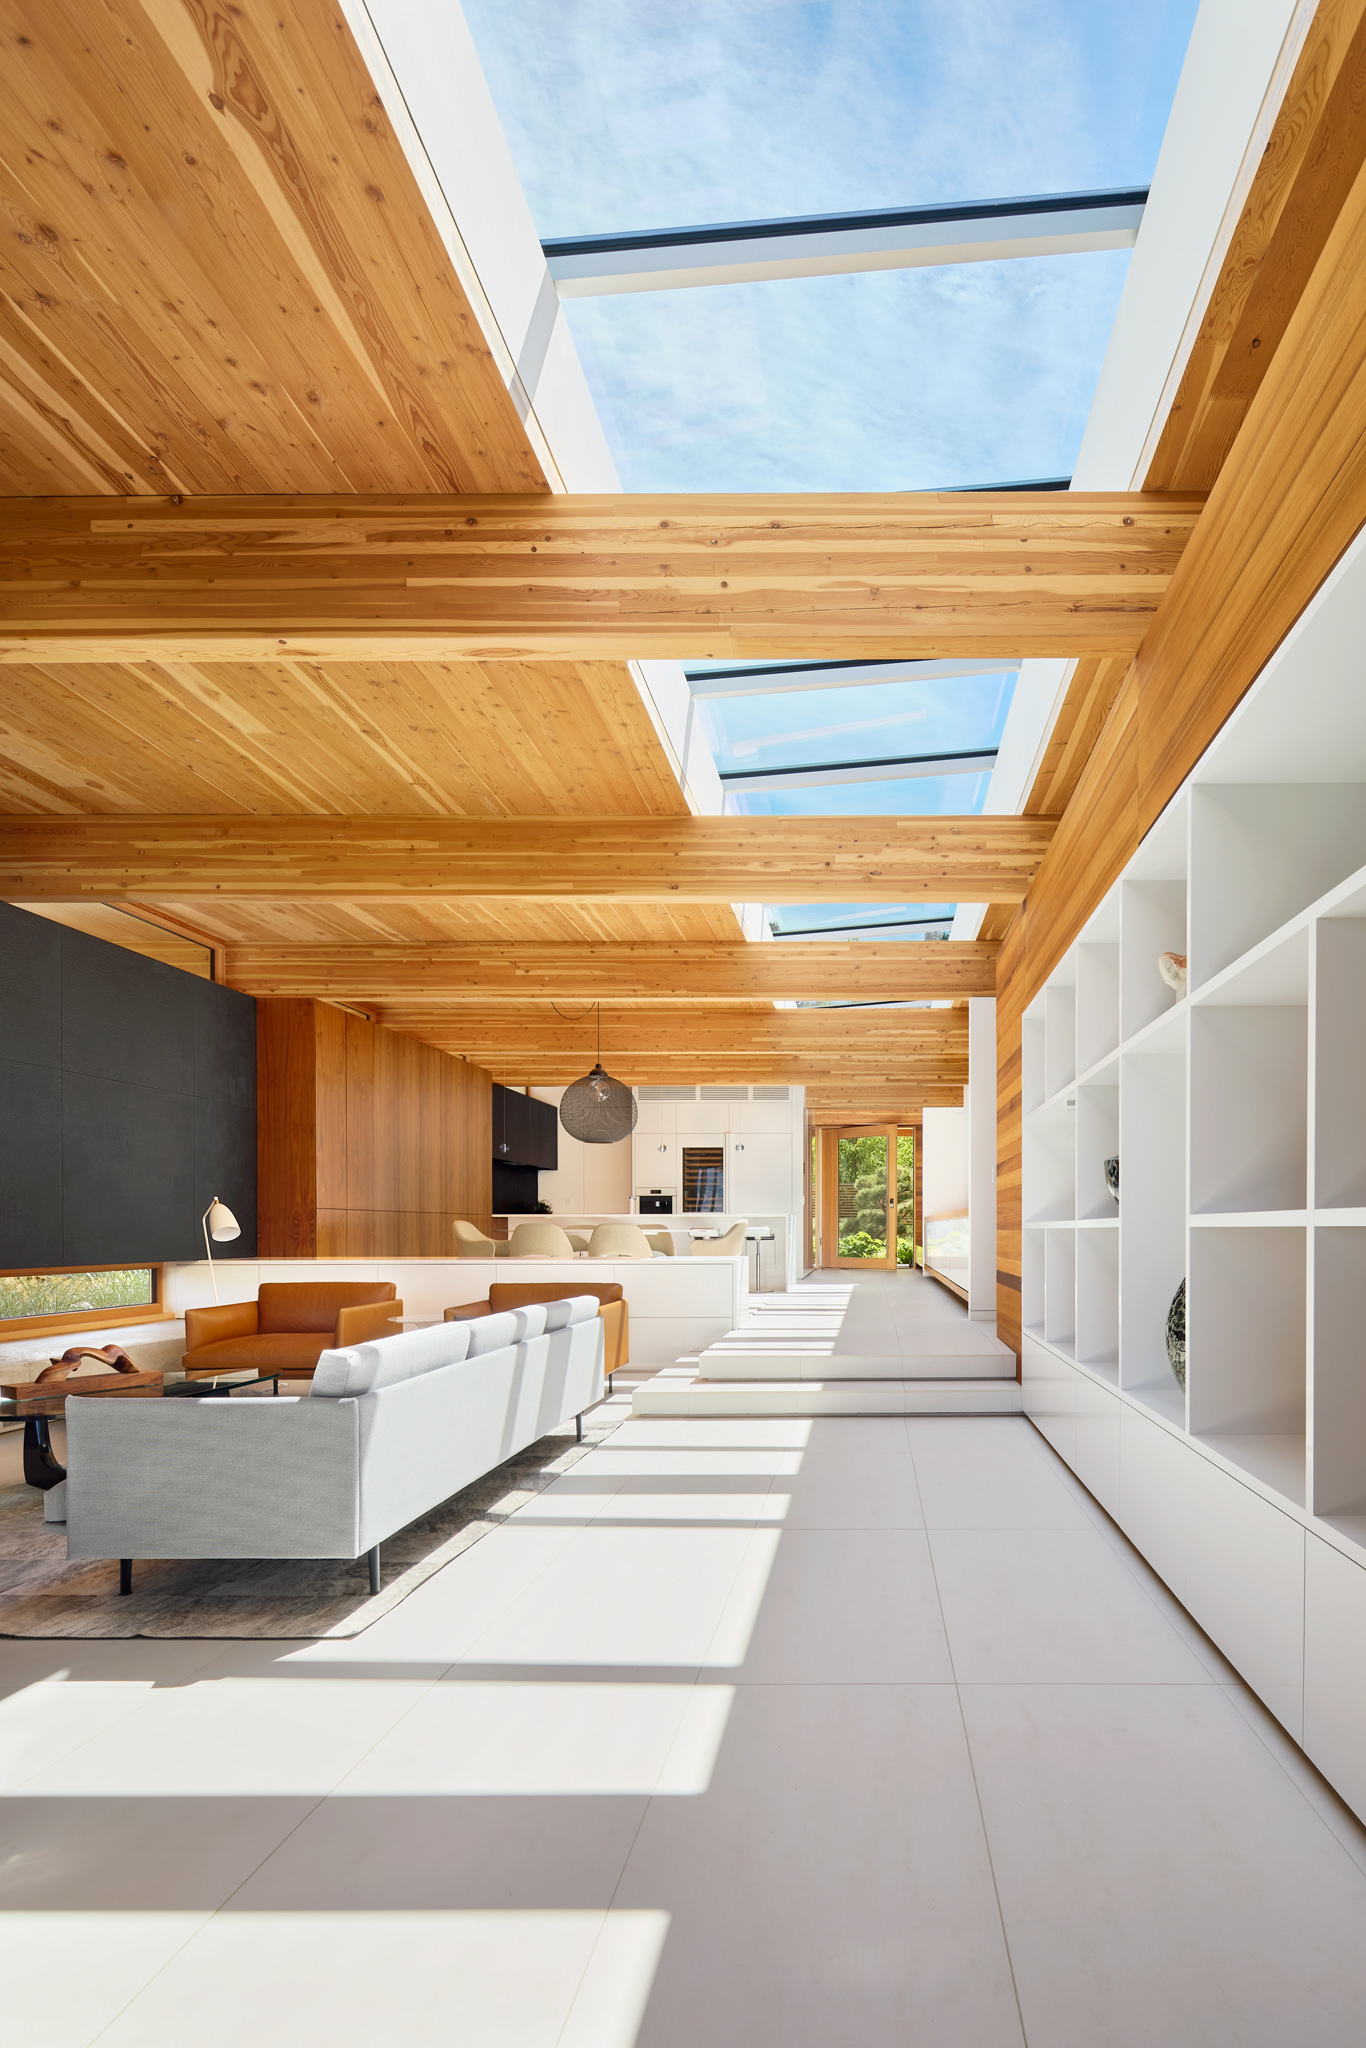 Interior view of modern bright home with blue skylights and view out front door